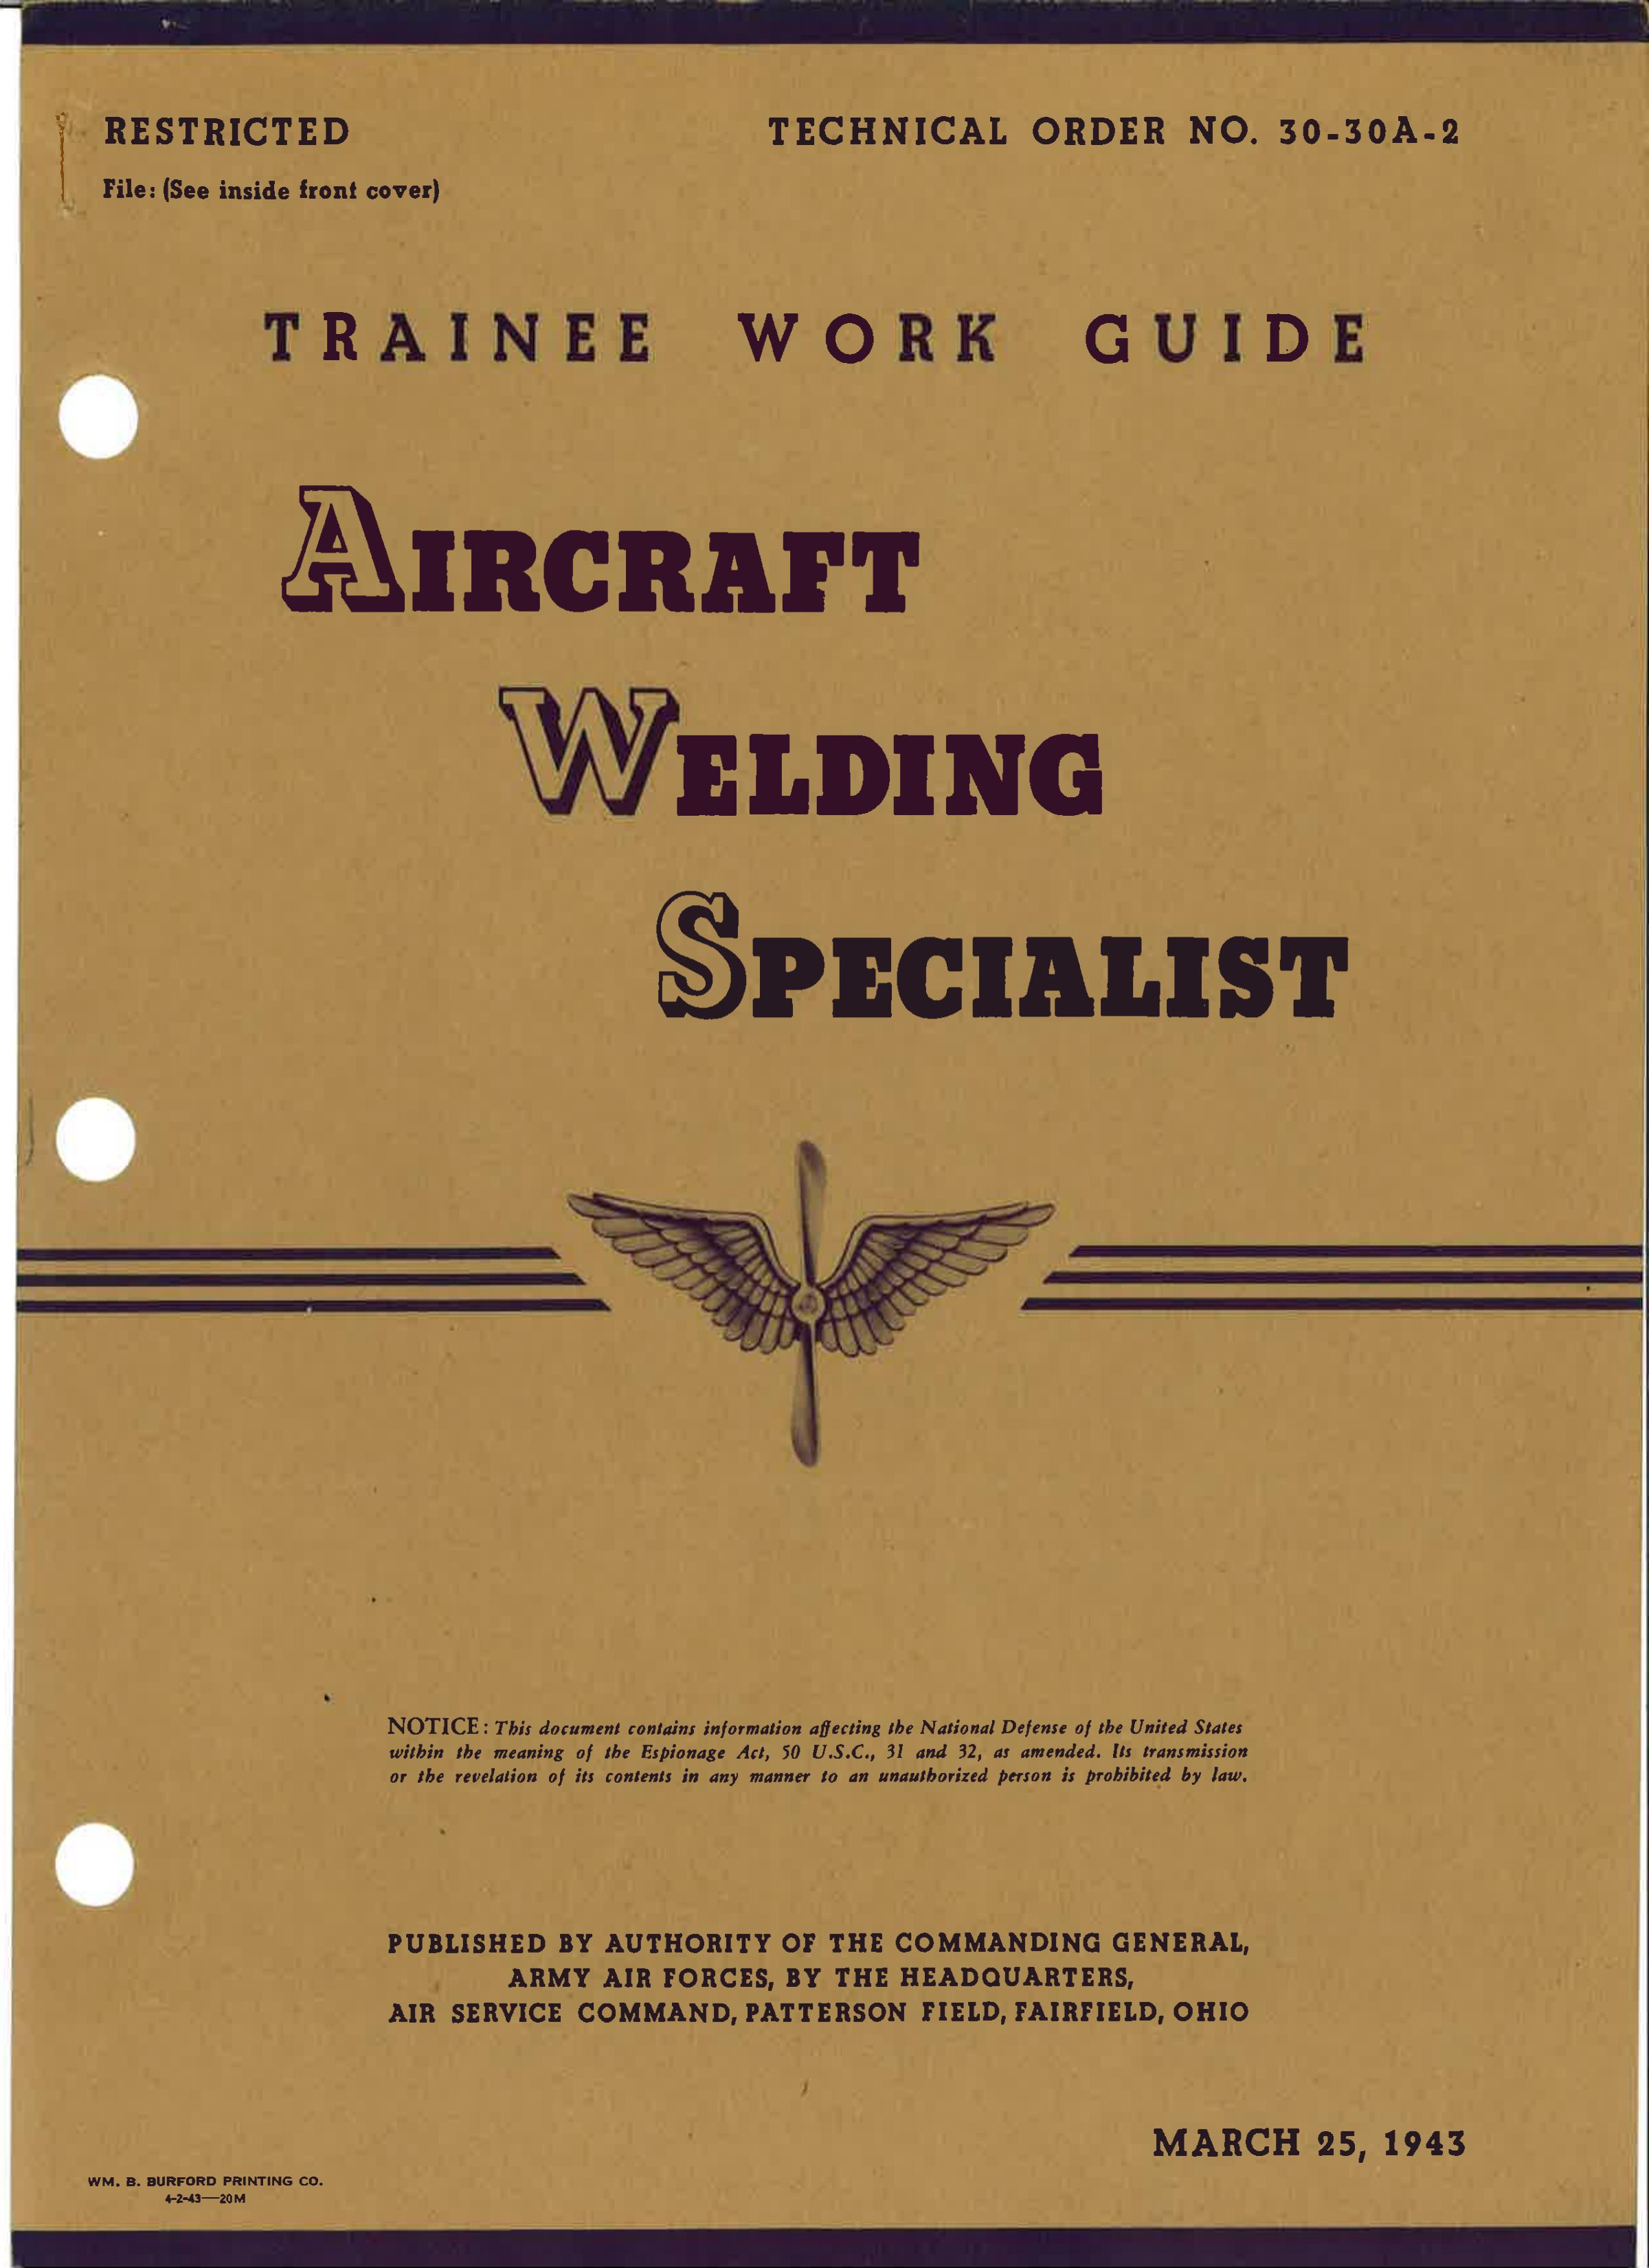 Sample page 1 from AirCorps Library document: Aircraft Welding Specialist - Trainee Work Guide